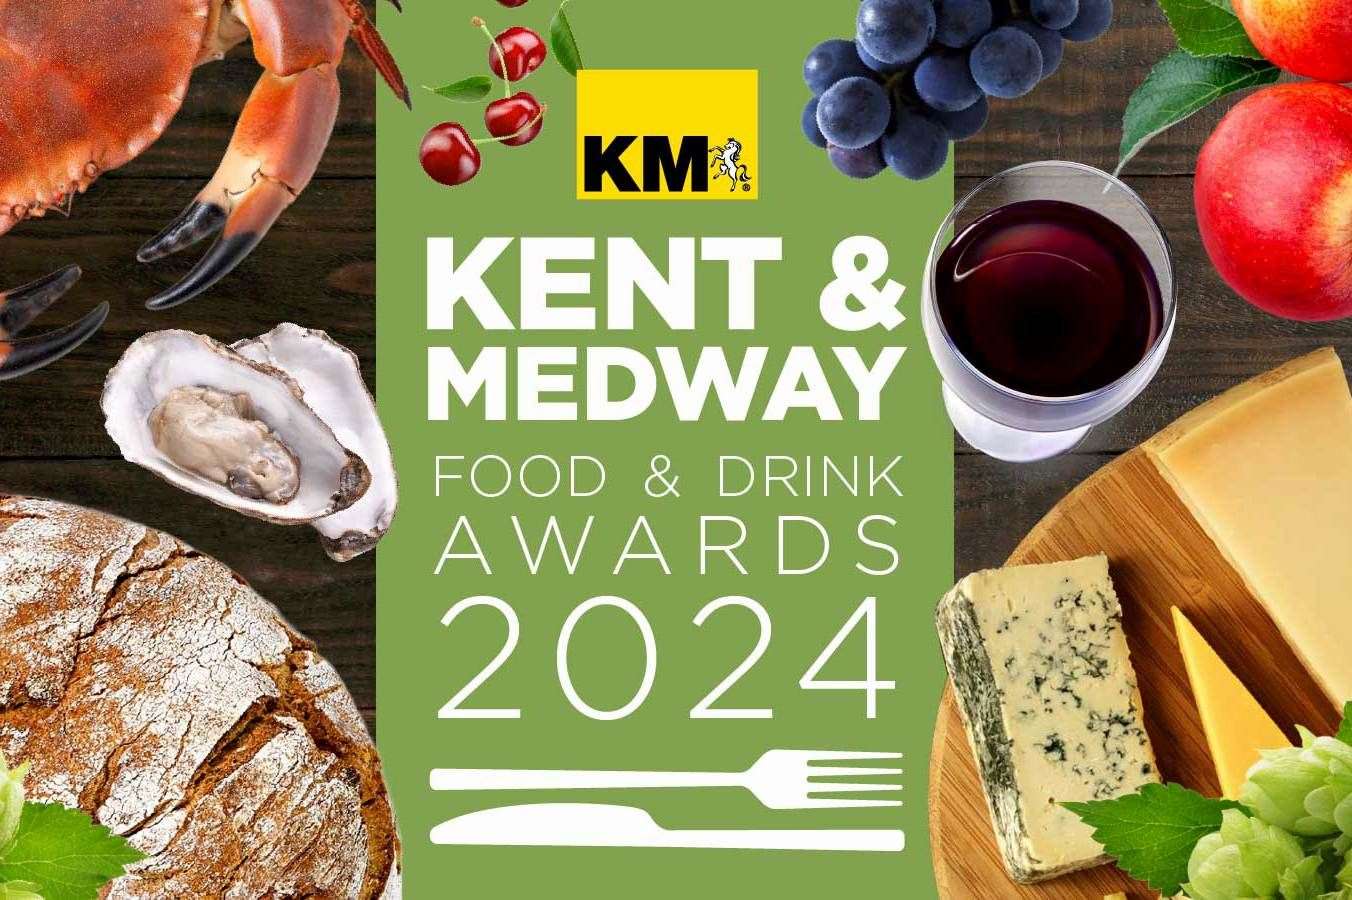 Find out who topped the list after receiving your nominations for the Kent & Medway Food & Drink Awards